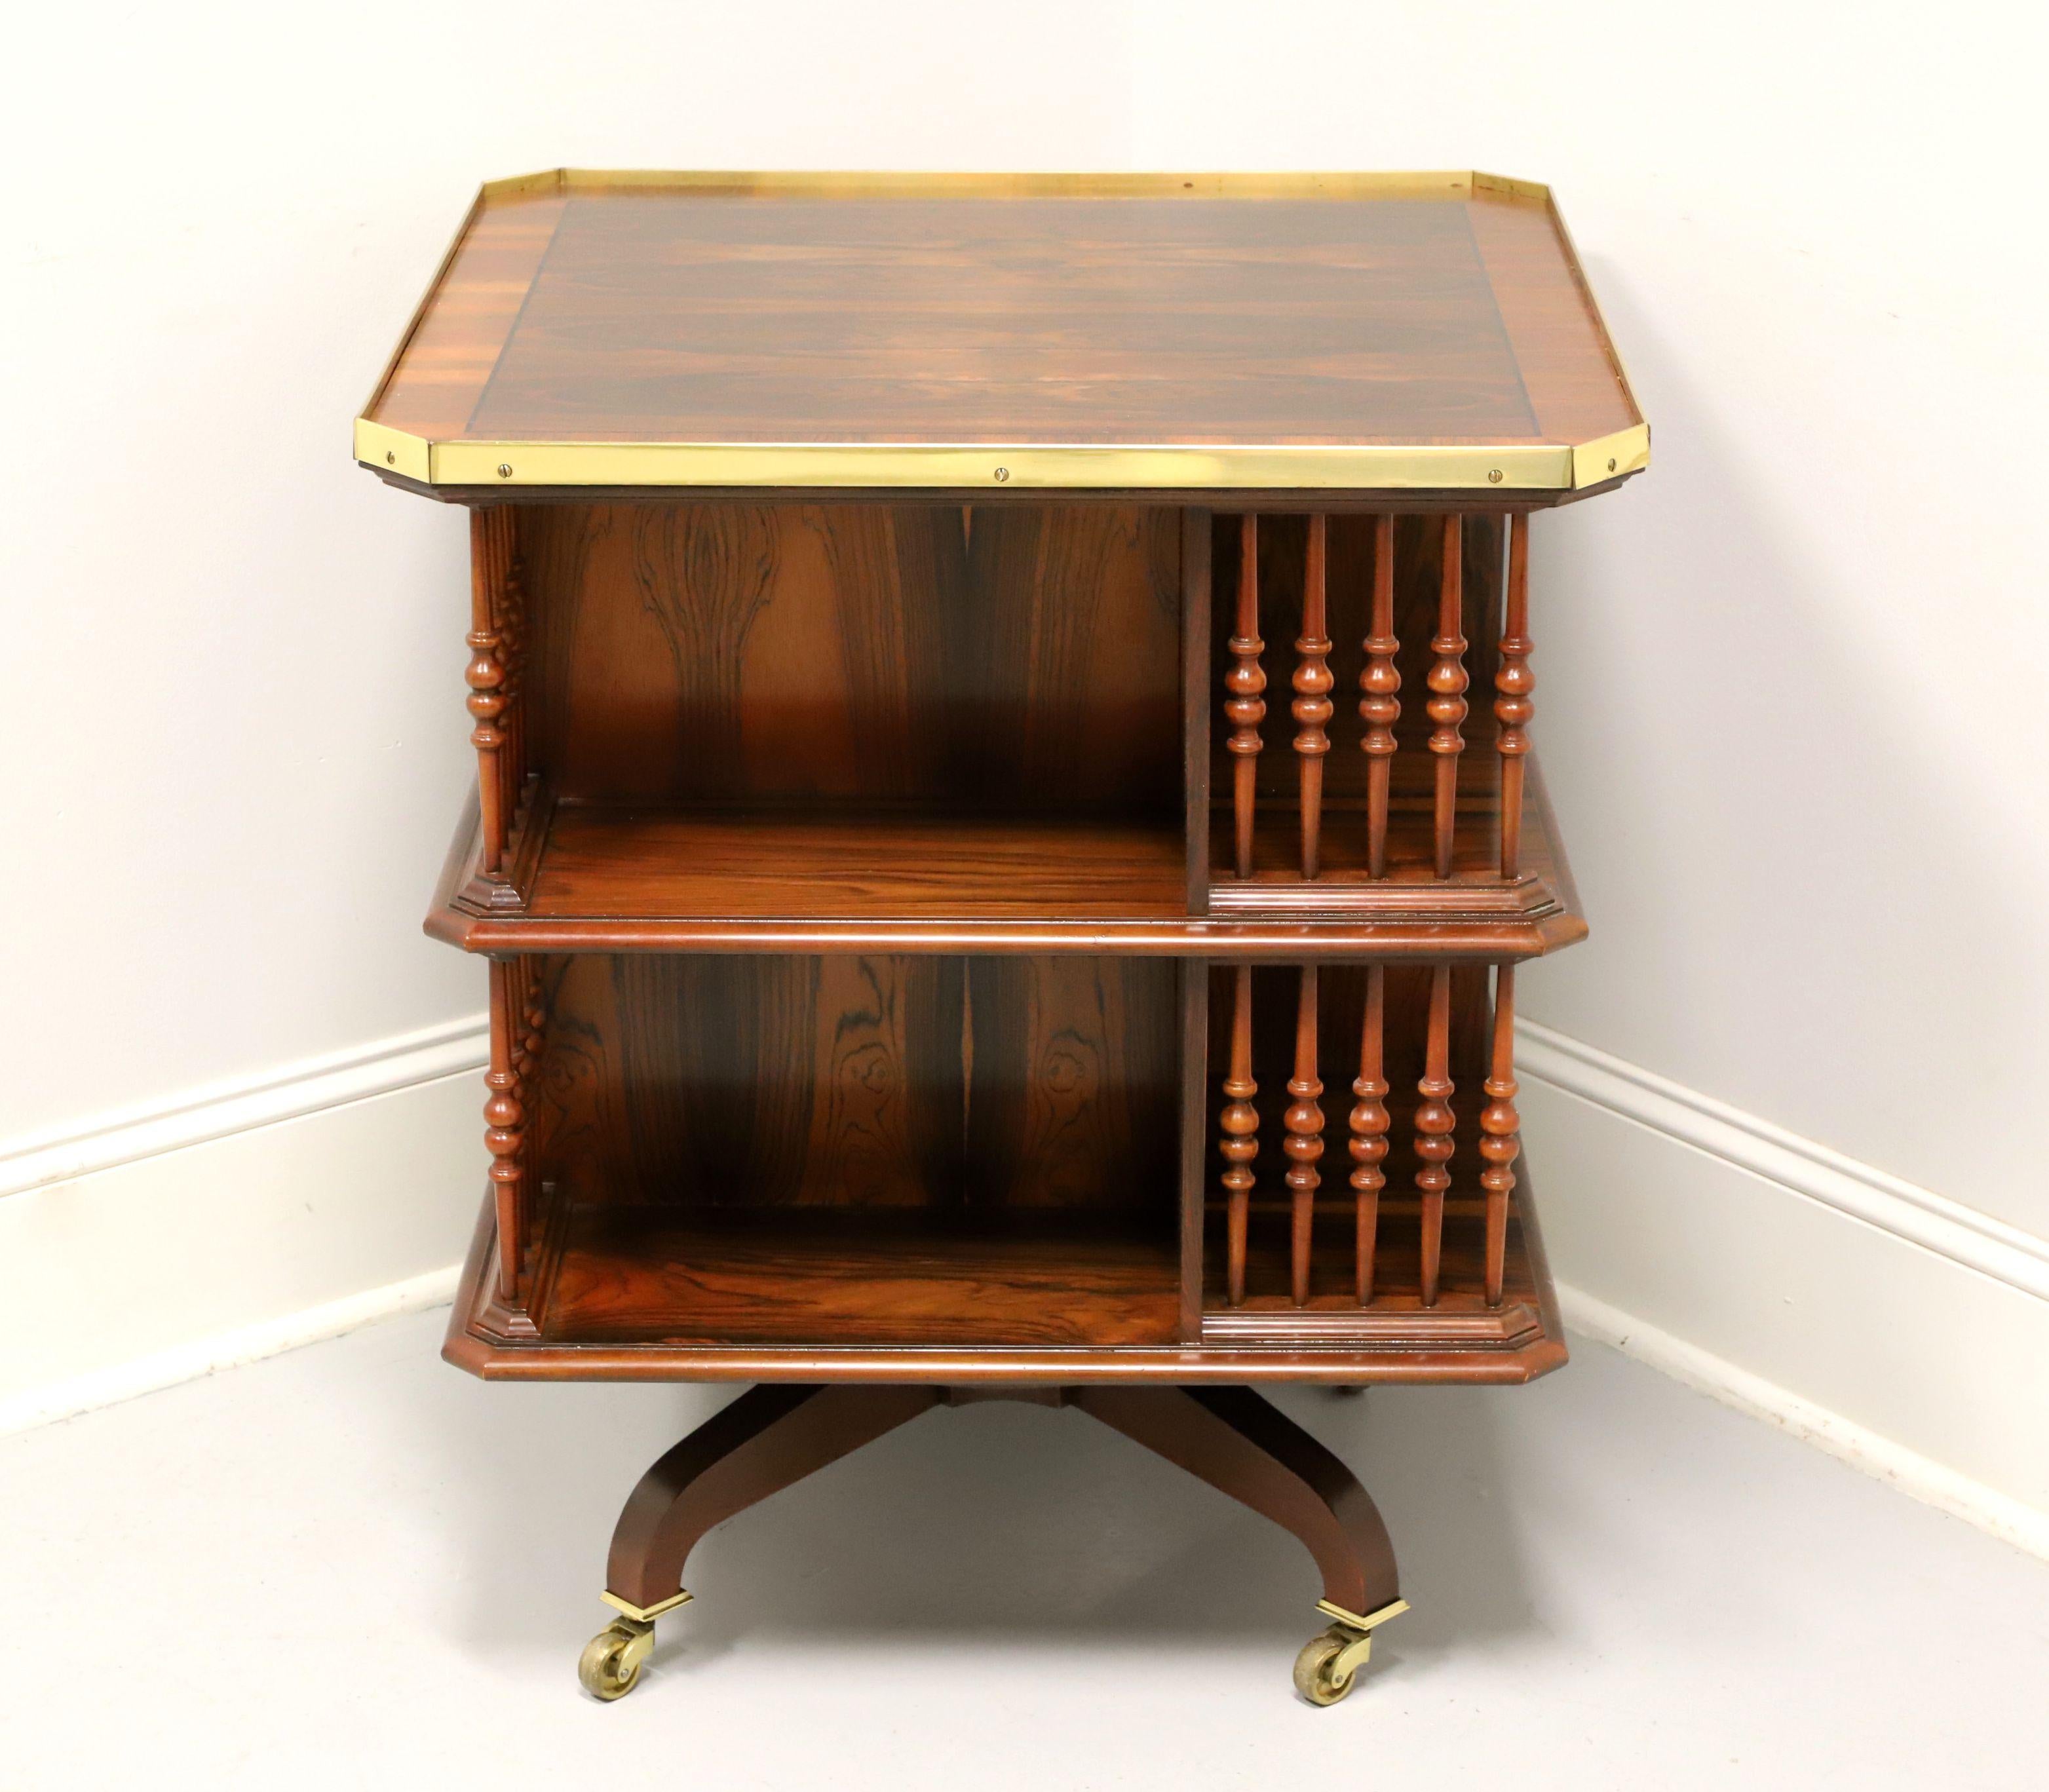 A rare, Regency style square bookcase side table by Baker Furniture, from their Stately Homes Collection. Rosewood with banded top, brass gallery, clipped corners, turned posts, revolving mechanism, and four leg base with brass casters. Features two